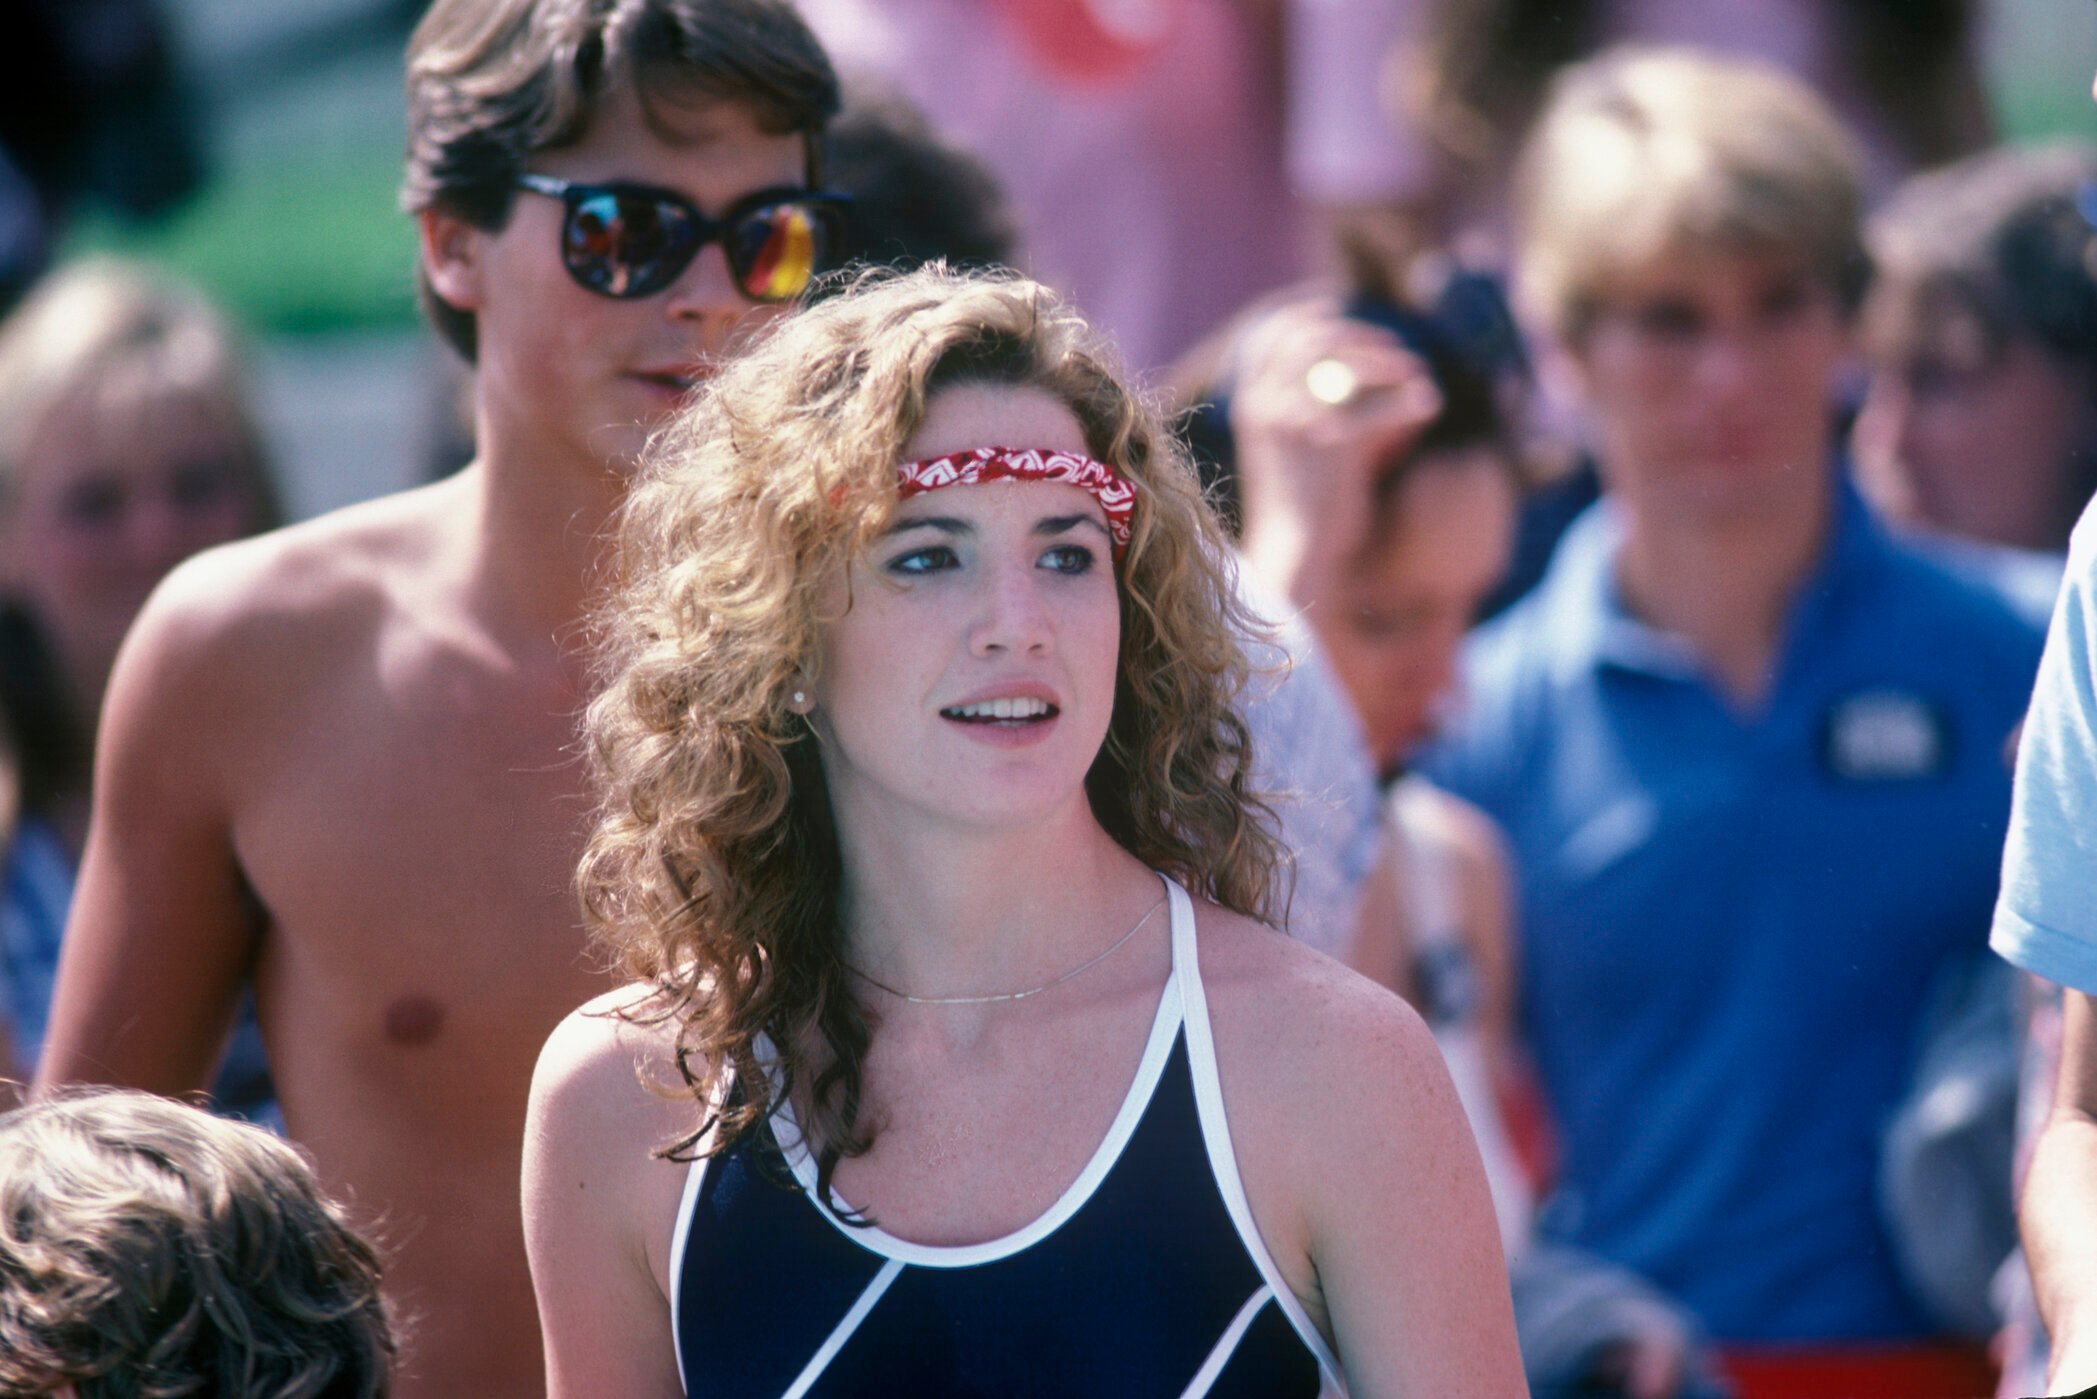 Rob Lowe and Melissa Gilbert at "Battle of the Network Stars" in 1982